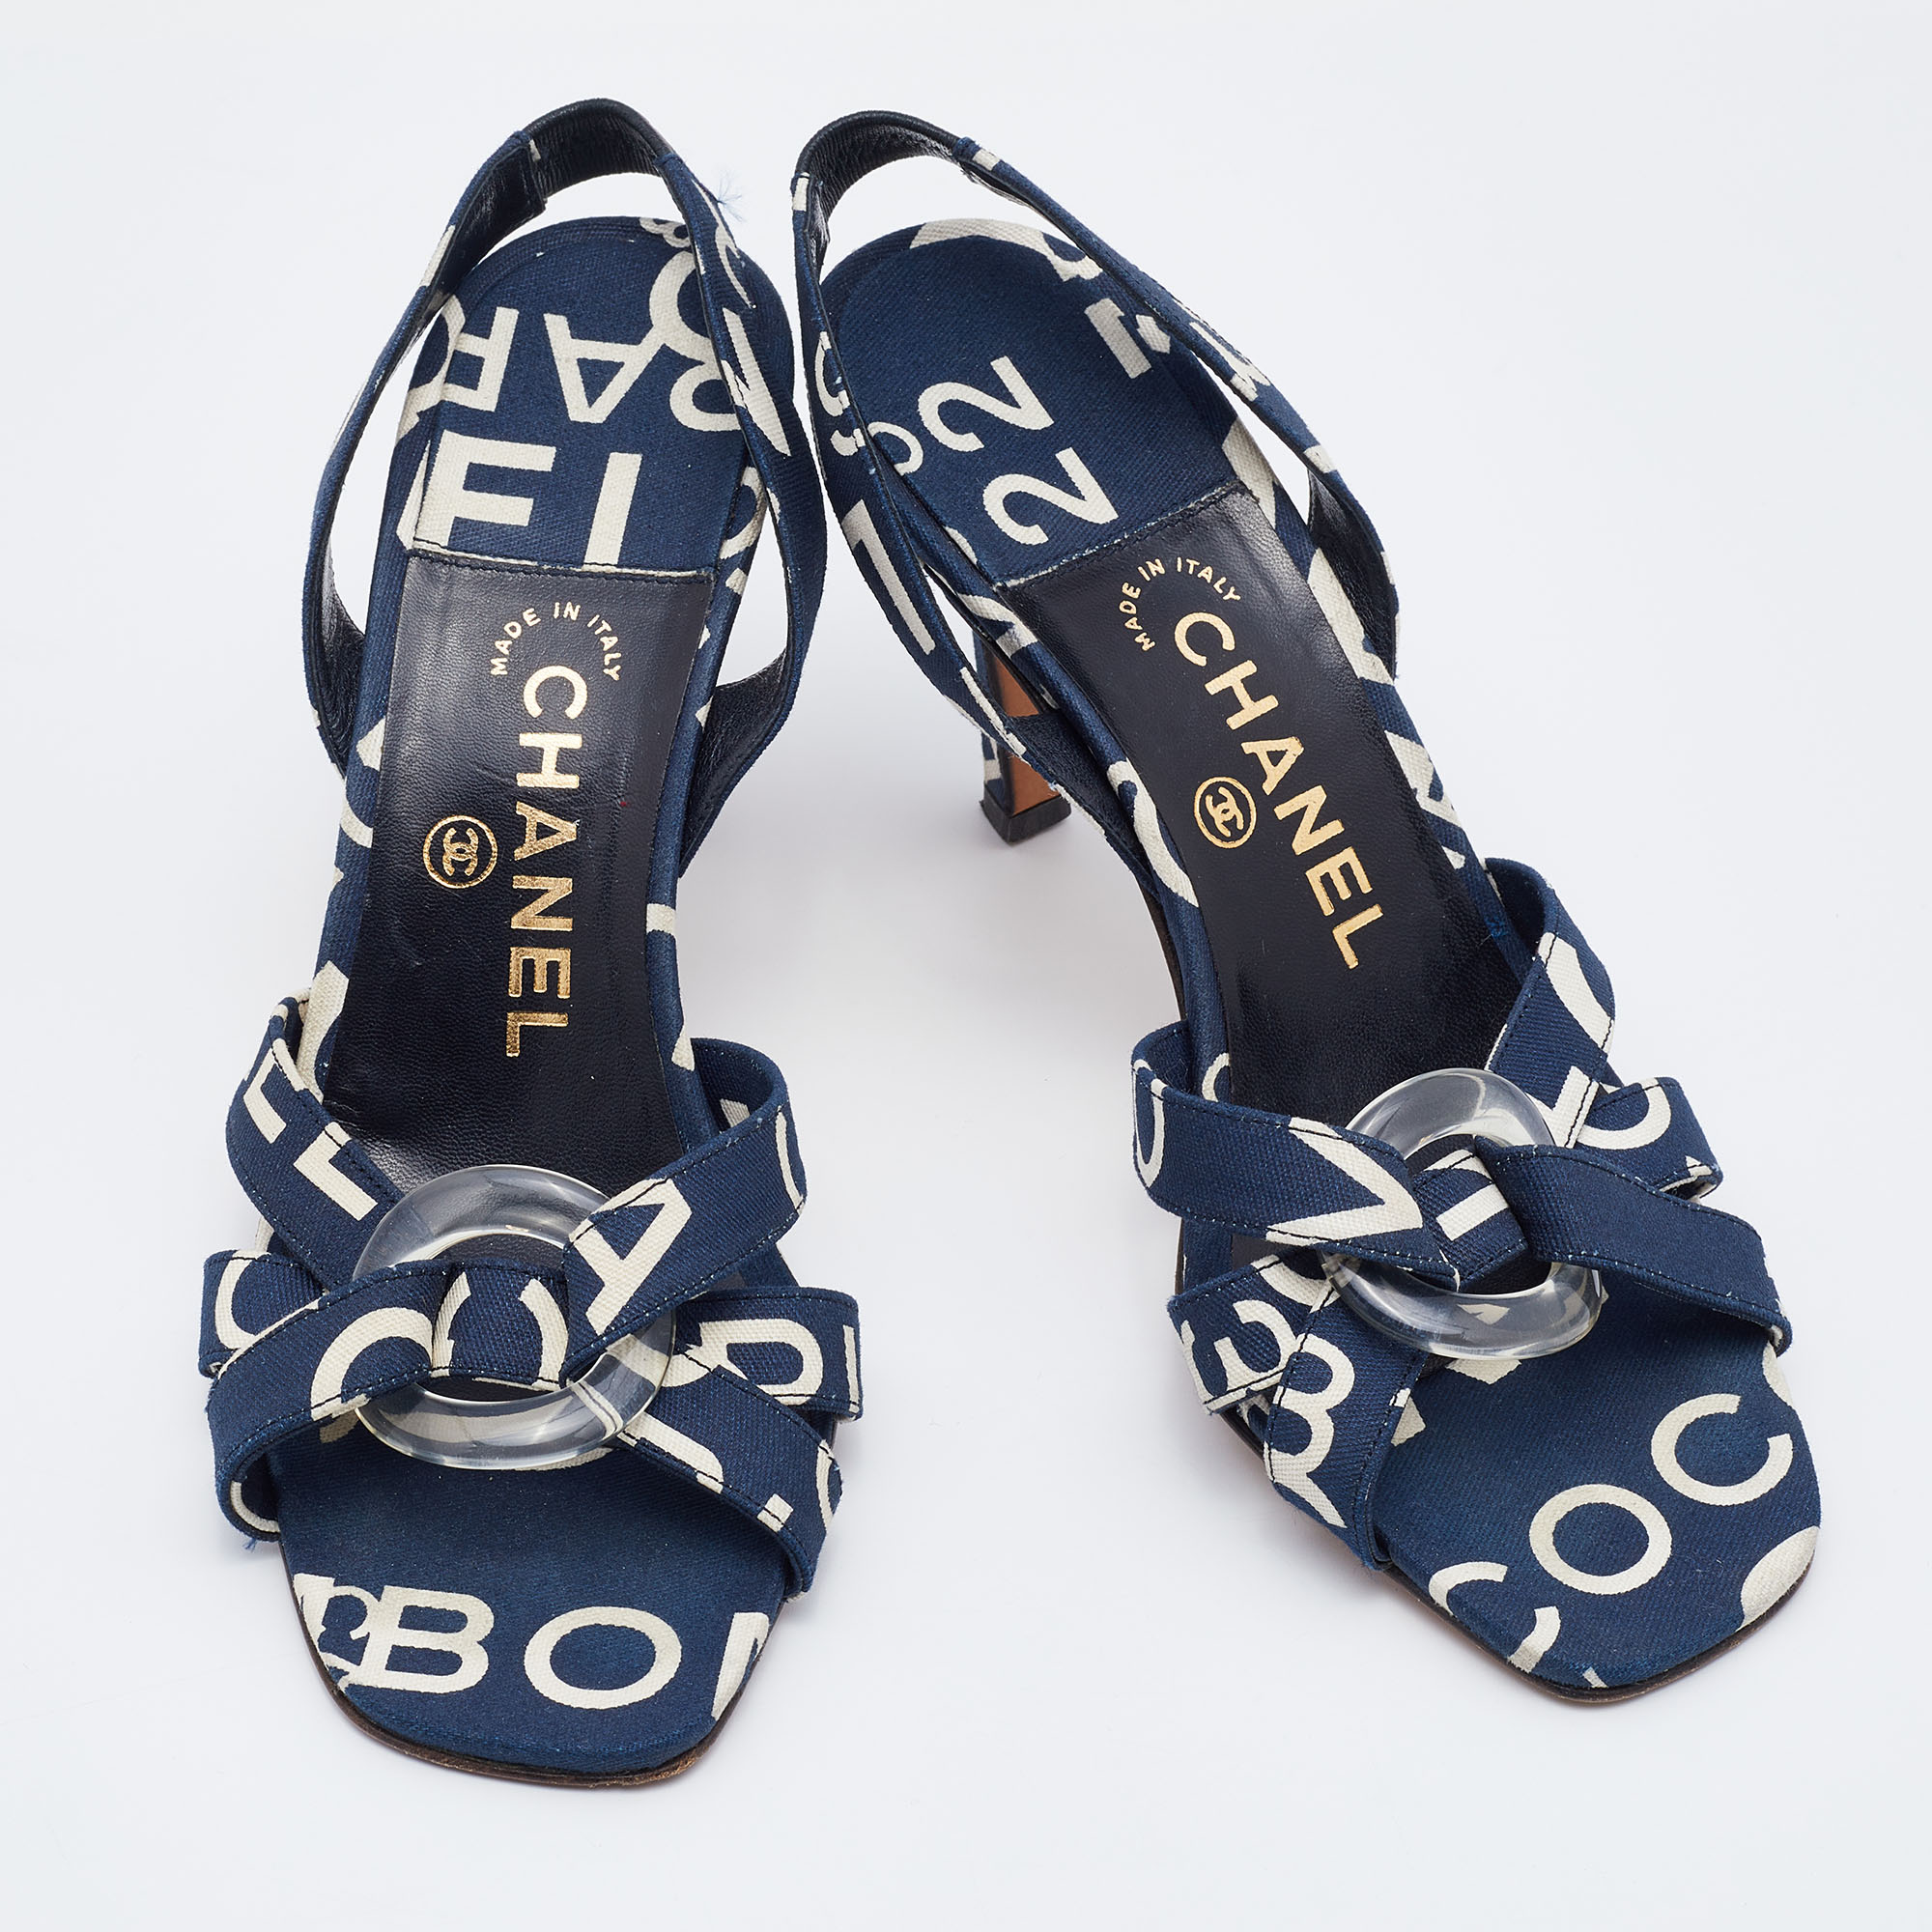 Chanel Blue/White Printed Canvas Slingback Sandals Size 37